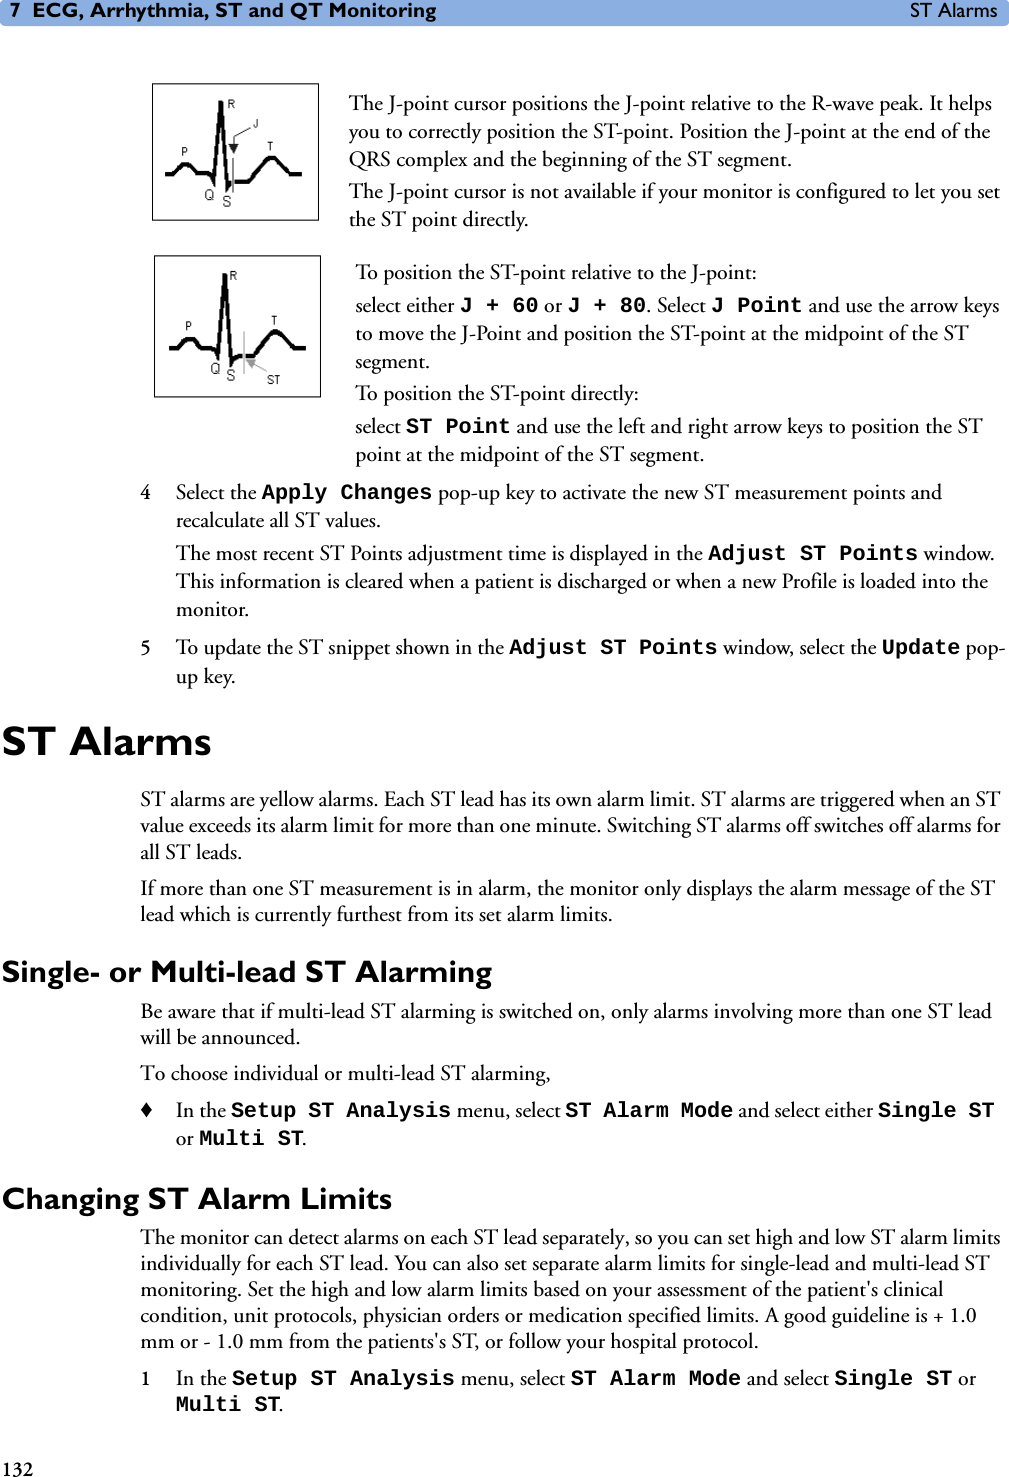 7 ECG, Arrhythmia, ST and QT Monitoring ST Alarms132The J-point cursor positions the J-point relative to the R-wave peak. It helps you to correctly position the ST-point. Position the J-point at the end of the QRS complex and the beginning of the ST segment. The J-point cursor is not available if your monitor is configured to let you set the ST point directly. To position the ST-point relative to the J-point:select either J+60 or J+80. Select J Point and use the arrow keys to move the J-Point and position the ST-point at the midpoint of the ST segment. To position the ST-point directly: select ST Point and use the left and right arrow keys to position the ST point at the midpoint of the ST segment.4Select the Apply Changes pop-up key to activate the new ST measurement points and recalculate all ST values.The most recent ST Points adjustment time is displayed in the Adjust ST Points window. This information is cleared when a patient is discharged or when a new Profile is loaded into the monitor. 5To update the ST snippet shown in the Adjust ST Points window, select the Update pop-up key.ST Alarms ST alarms are yellow alarms. Each ST lead has its own alarm limit. ST alarms are triggered when an ST value exceeds its alarm limit for more than one minute. Switching ST alarms off switches off alarms for all ST leads. If more than one ST measurement is in alarm, the monitor only displays the alarm message of the ST lead which is currently furthest from its set alarm limits. Single- or Multi-lead ST AlarmingBe aware that if multi-lead ST alarming is switched on, only alarms involving more than one ST lead will be announced. To choose individual or multi-lead ST alarming,♦In the Setup ST Analysis menu, select ST Alarm Mode and select either Single ST or Multi ST.Changing ST Alarm LimitsThe monitor can detect alarms on each ST lead separately, so you can set high and low ST alarm limits individually for each ST lead. You can also set separate alarm limits for single-lead and multi-lead ST monitoring. Set the high and low alarm limits based on your assessment of the patient&apos;s clinical condition, unit protocols, physician orders or medication specified limits. A good guideline is + 1.0 mm or - 1.0 mm from the patients&apos;s ST, or follow your hospital protocol.1In the Setup ST Analysis menu, select ST Alarm Mode and select Single ST or Multi ST.